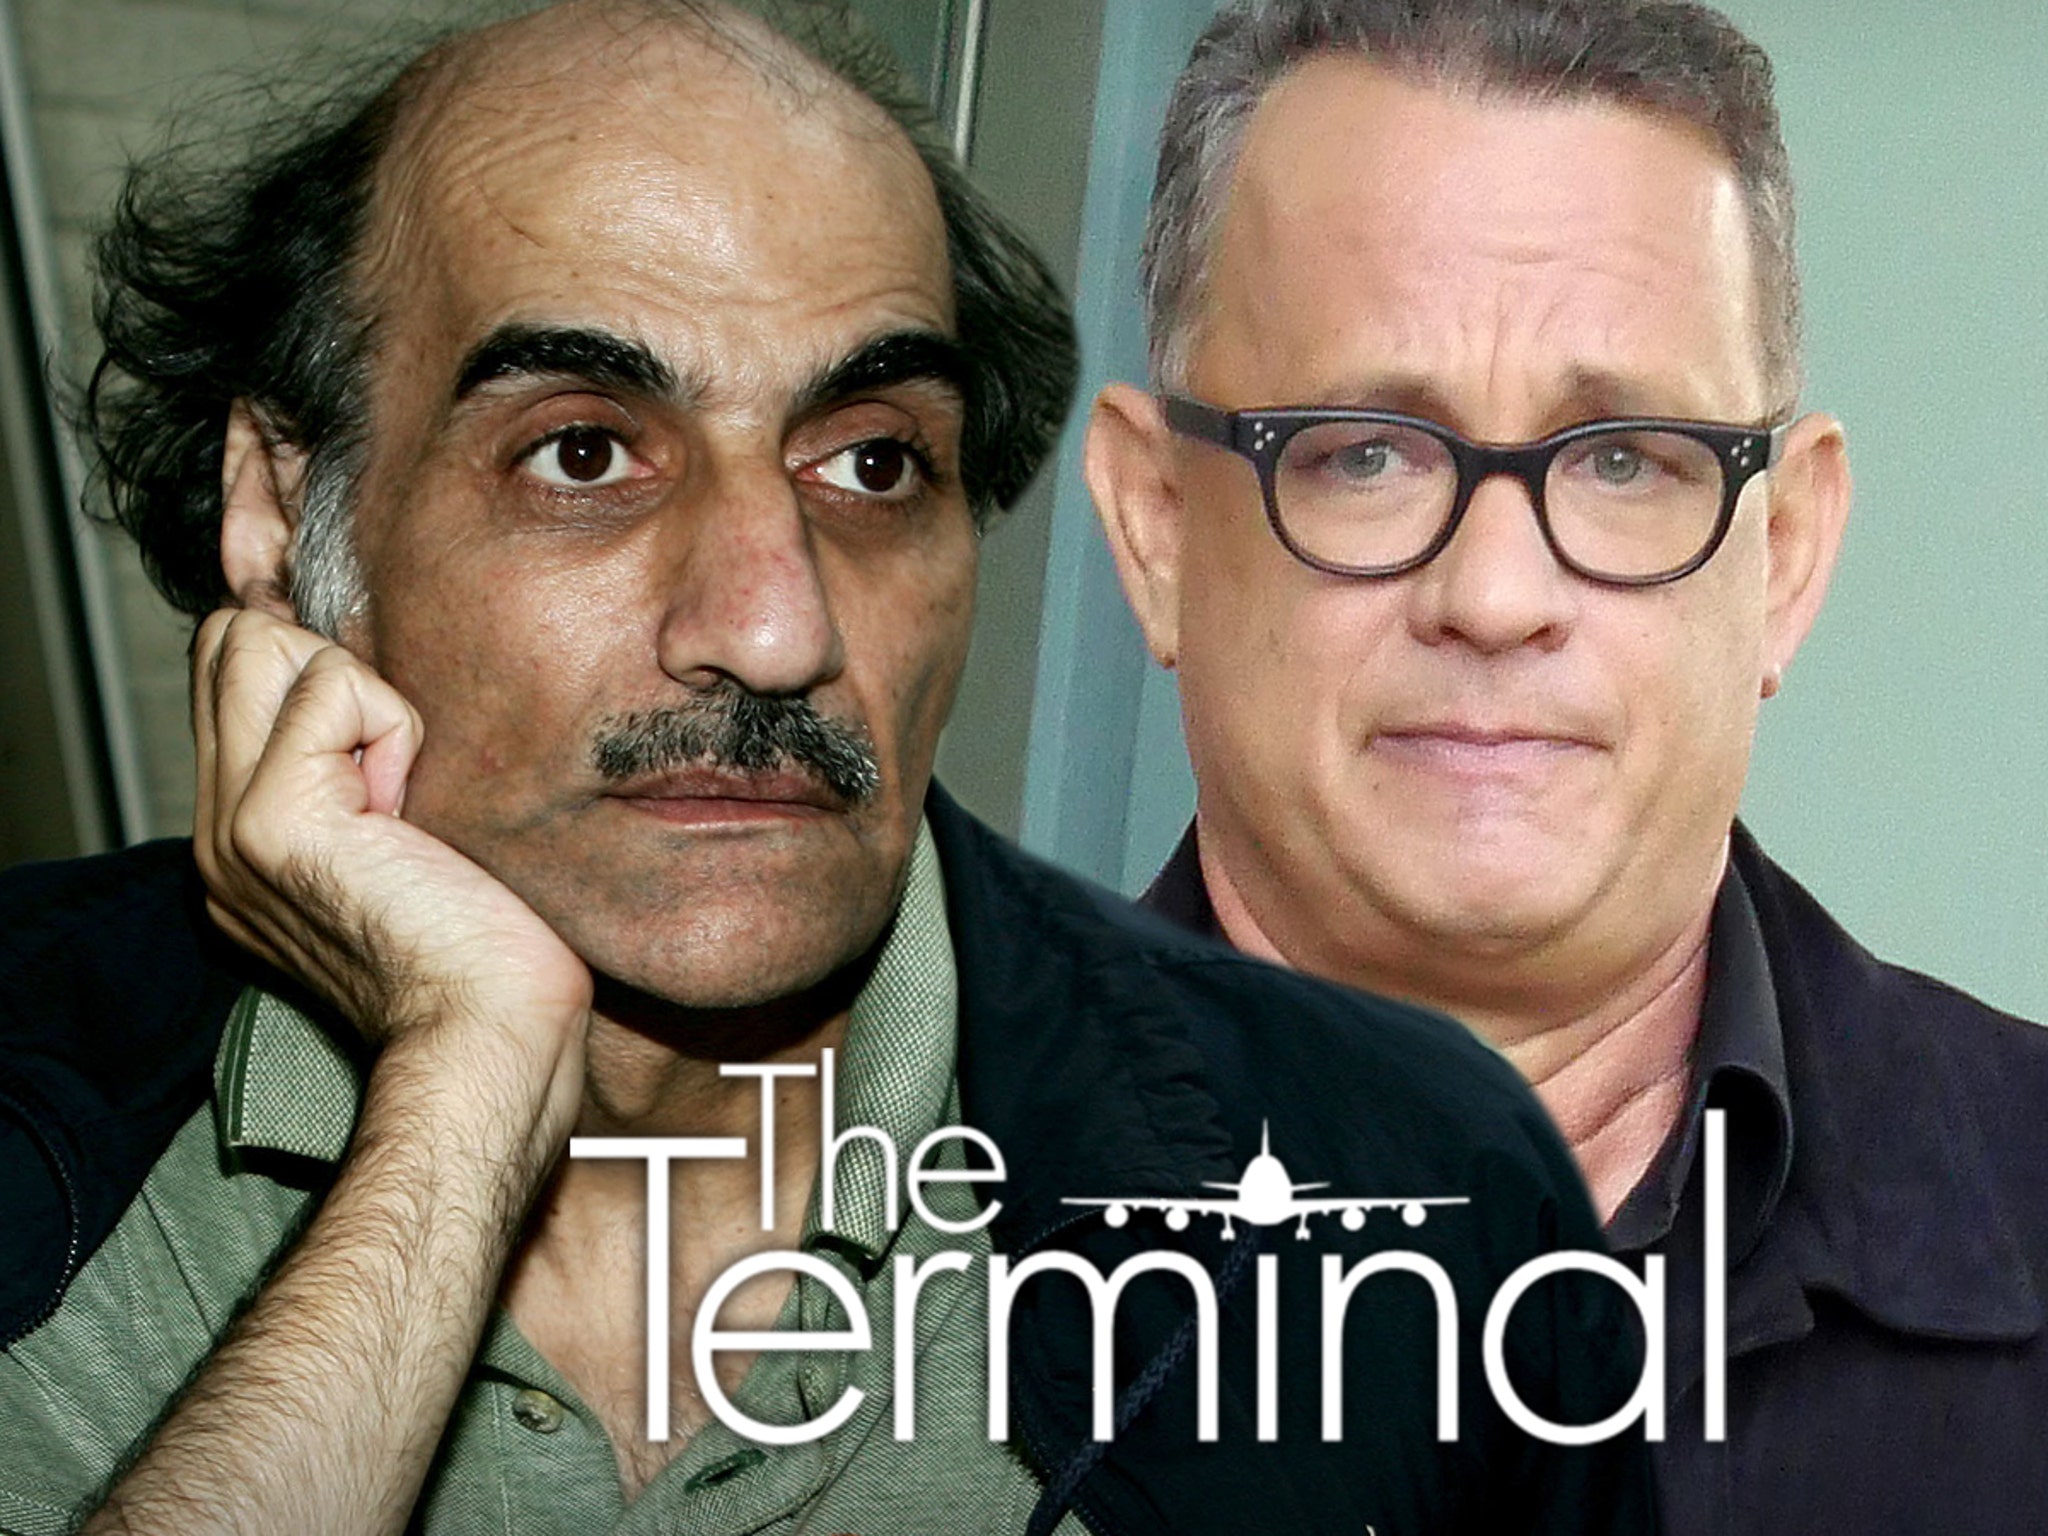 Man Who Inspired Steven Spielberg Film 'The Terminal' Dead